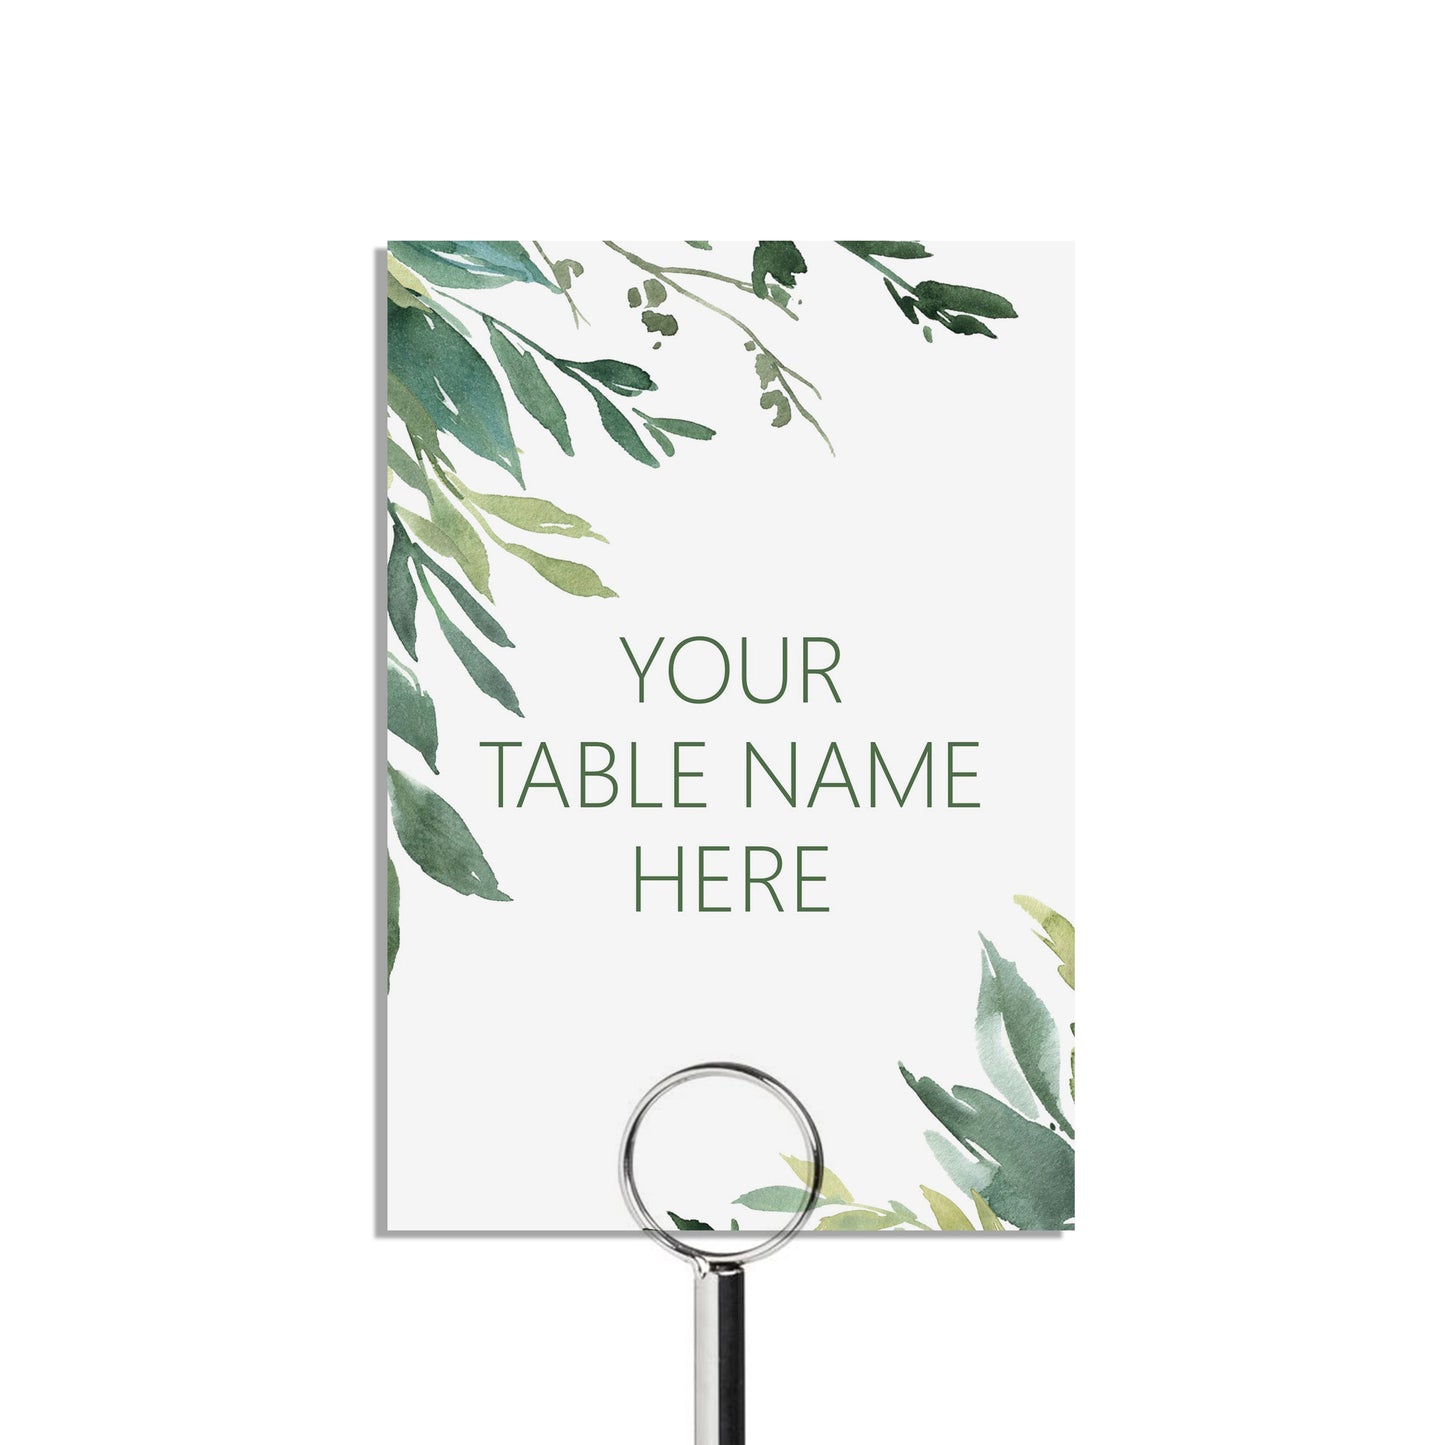 Table Name Cards, Greenery Design Custom Wording, 5x7 Inches